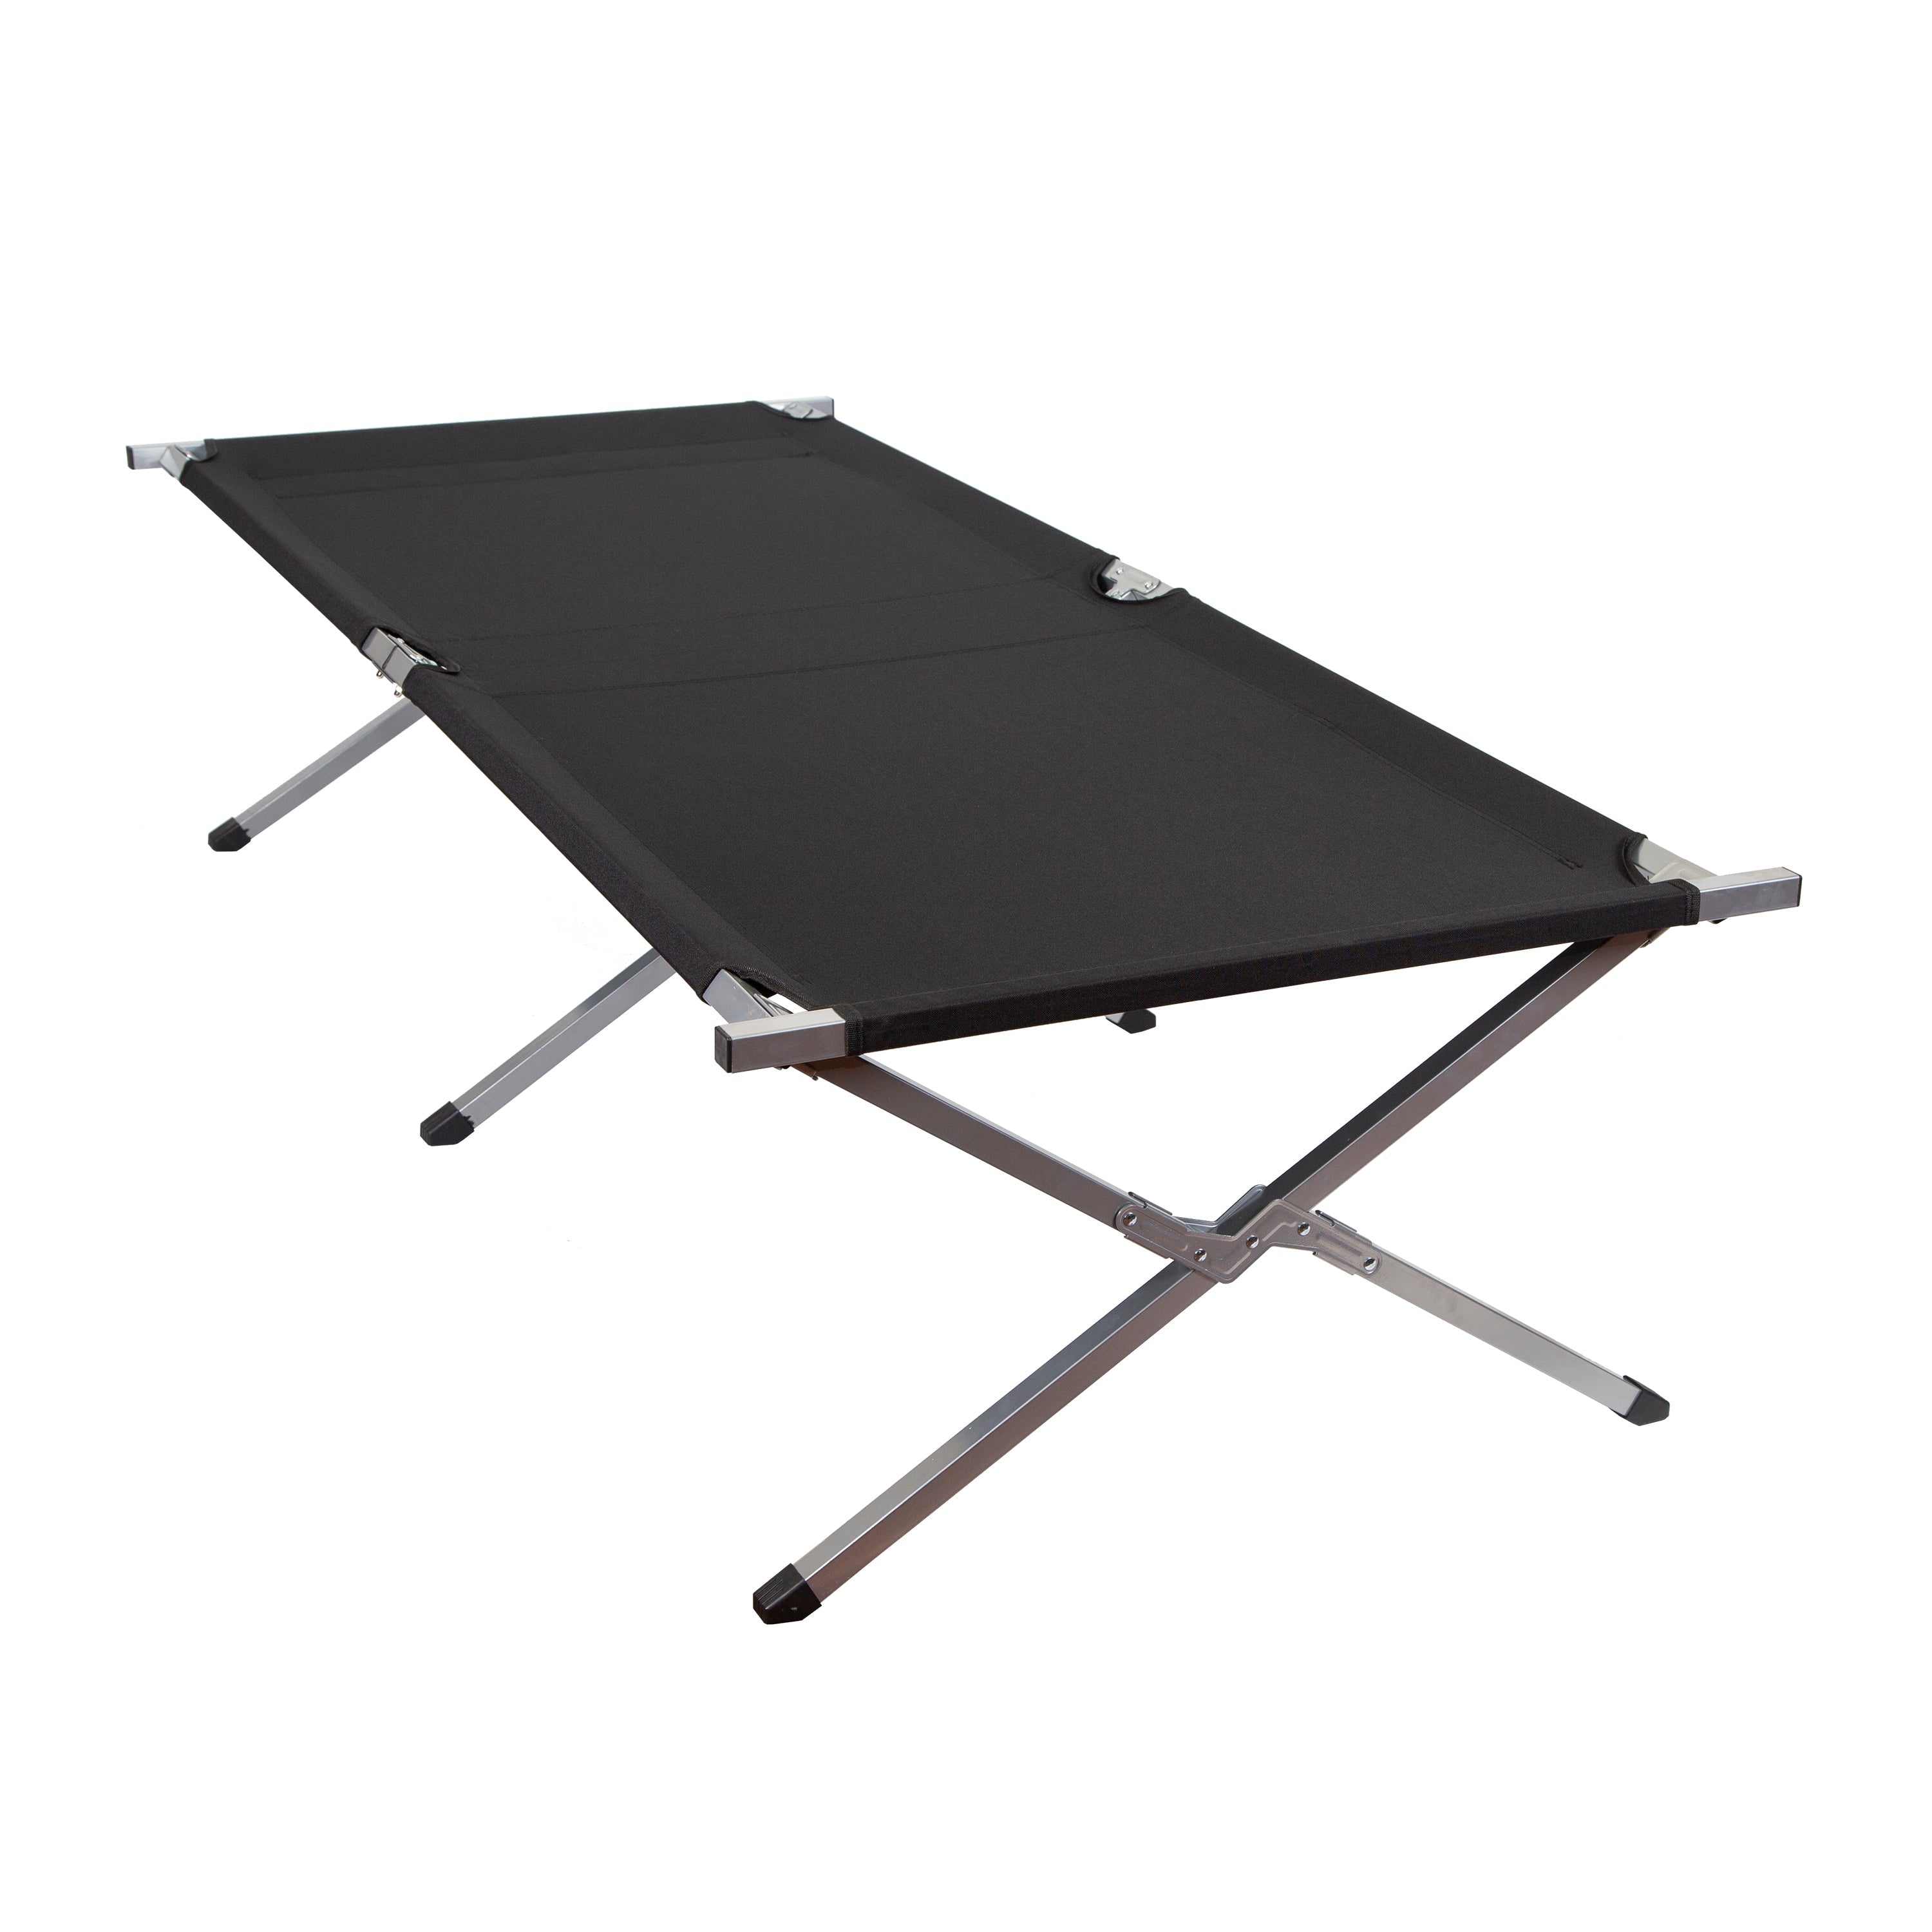 Heavy-Duty G.I. Cot - 86 X 40.25 X 21.25 Inches